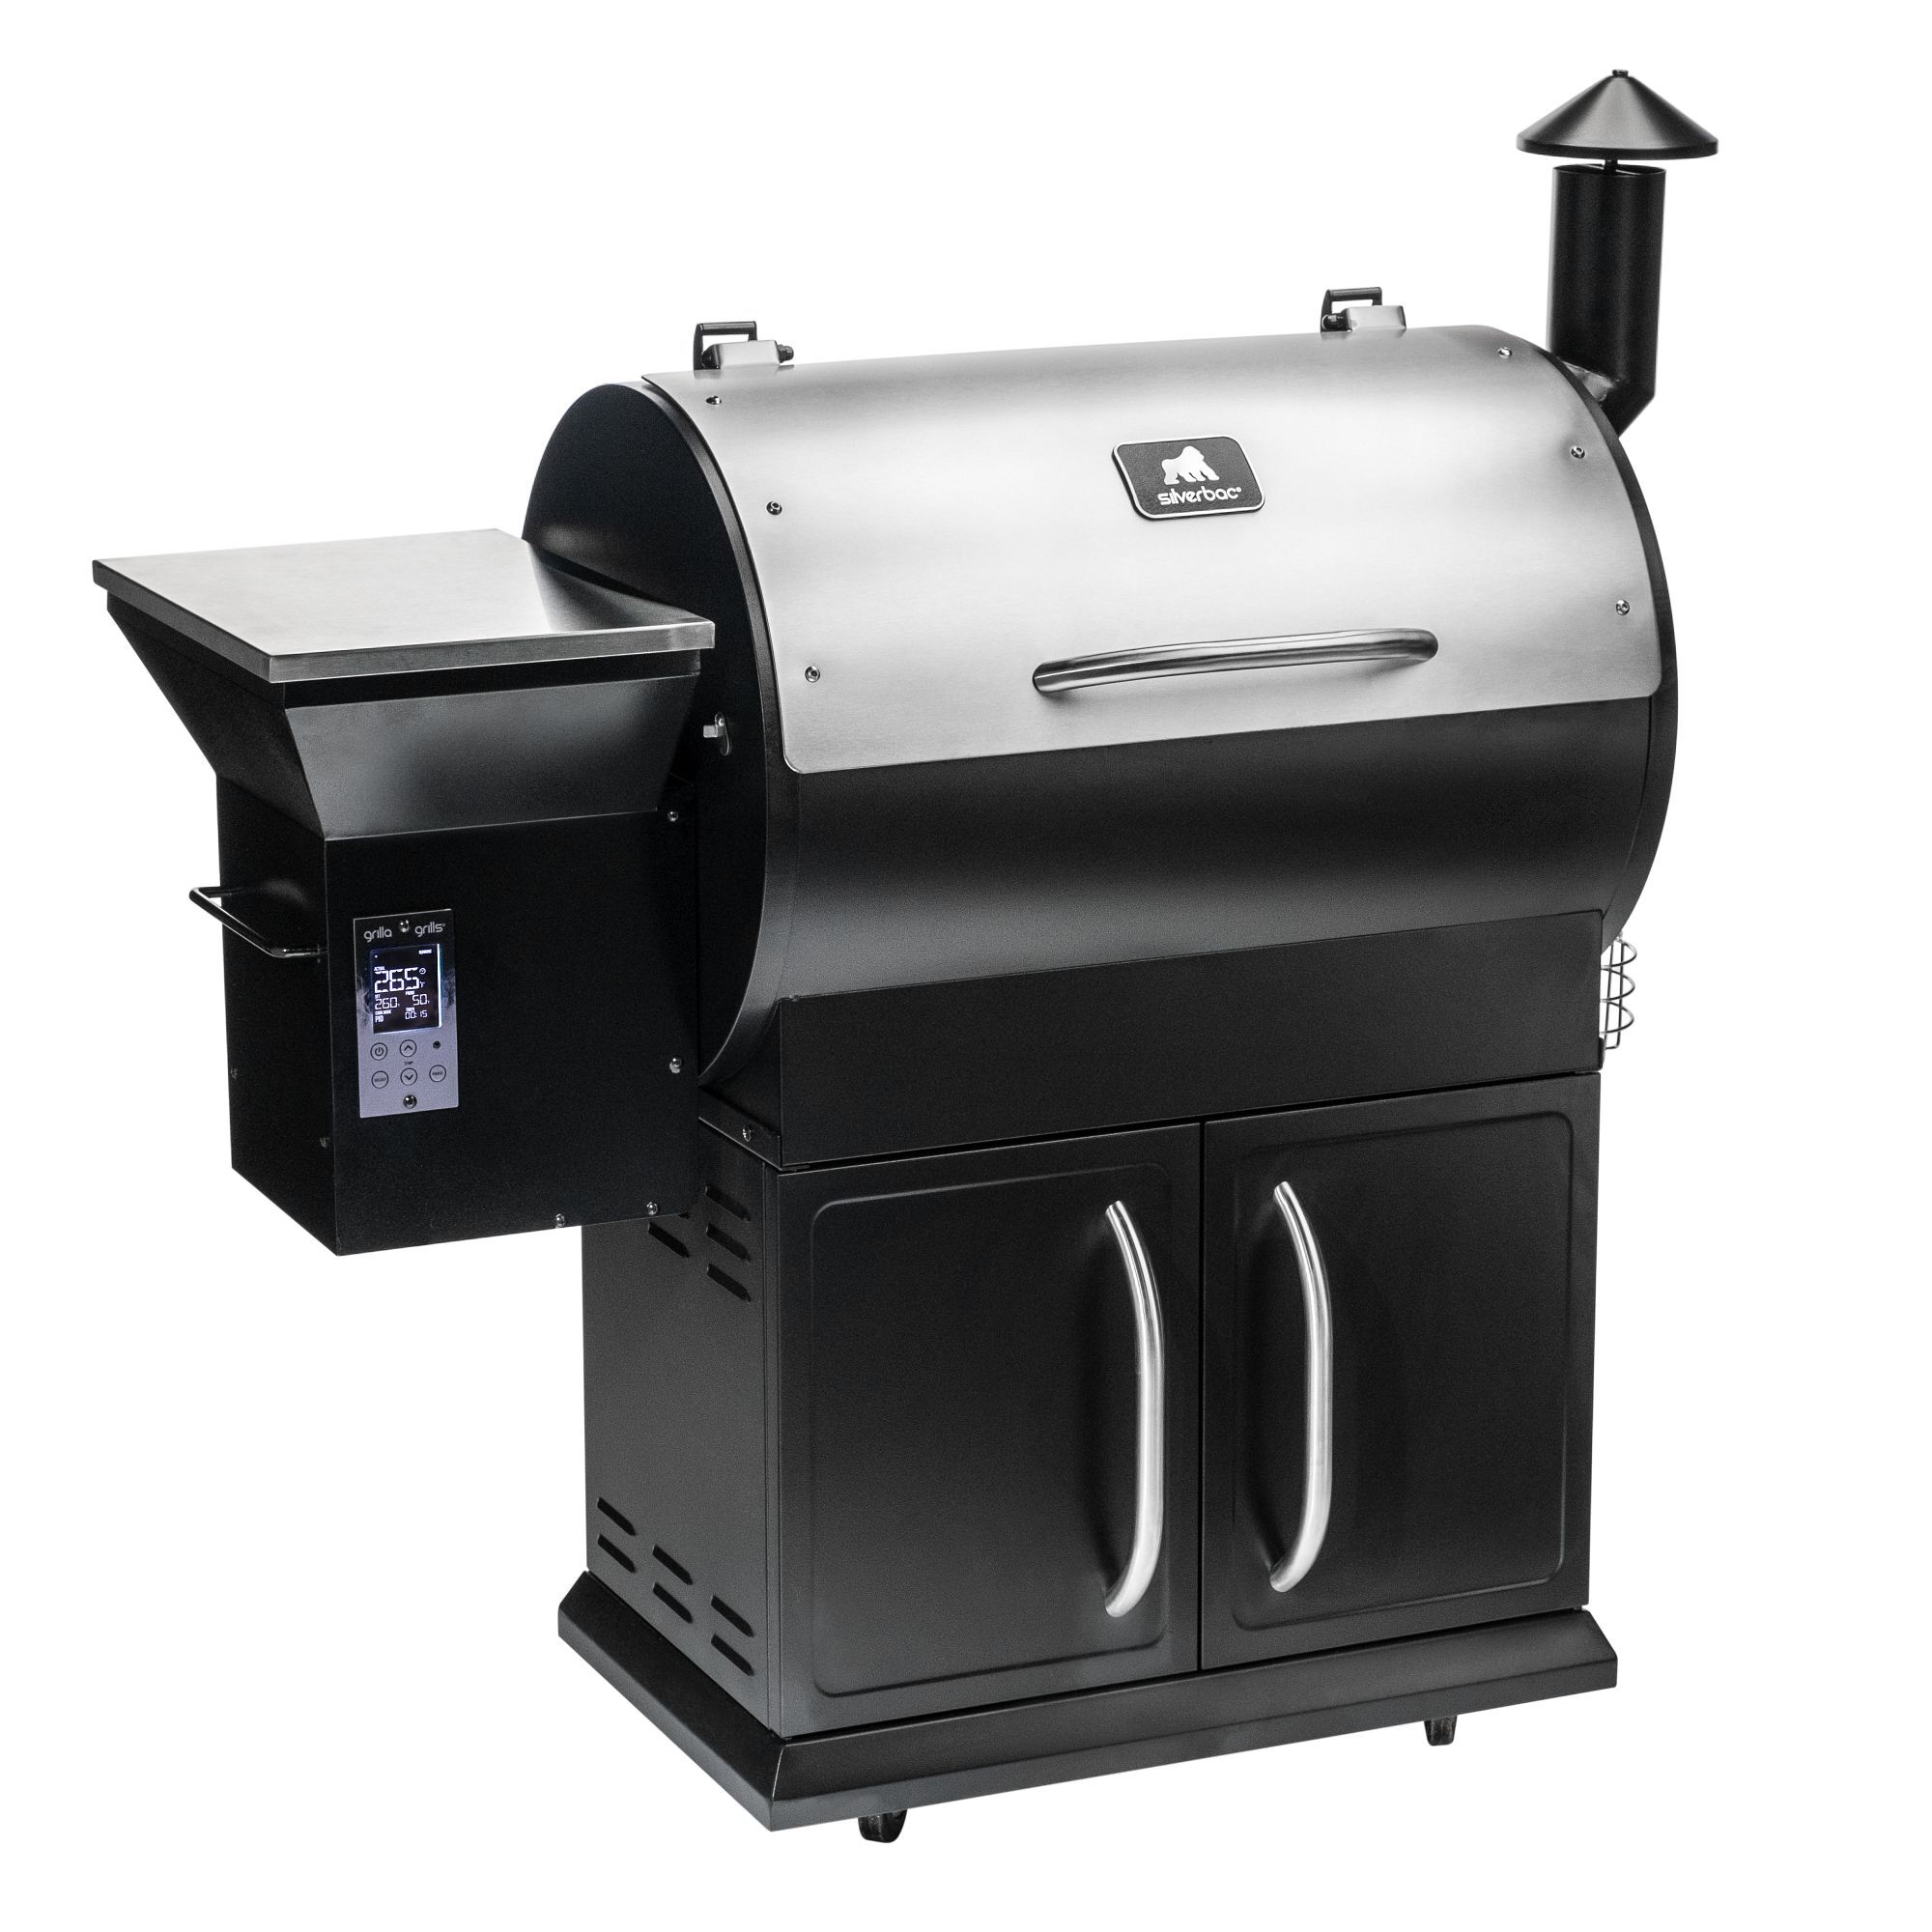 Silverbac Wood Pellet Grill Alpha Connect (WiFi)